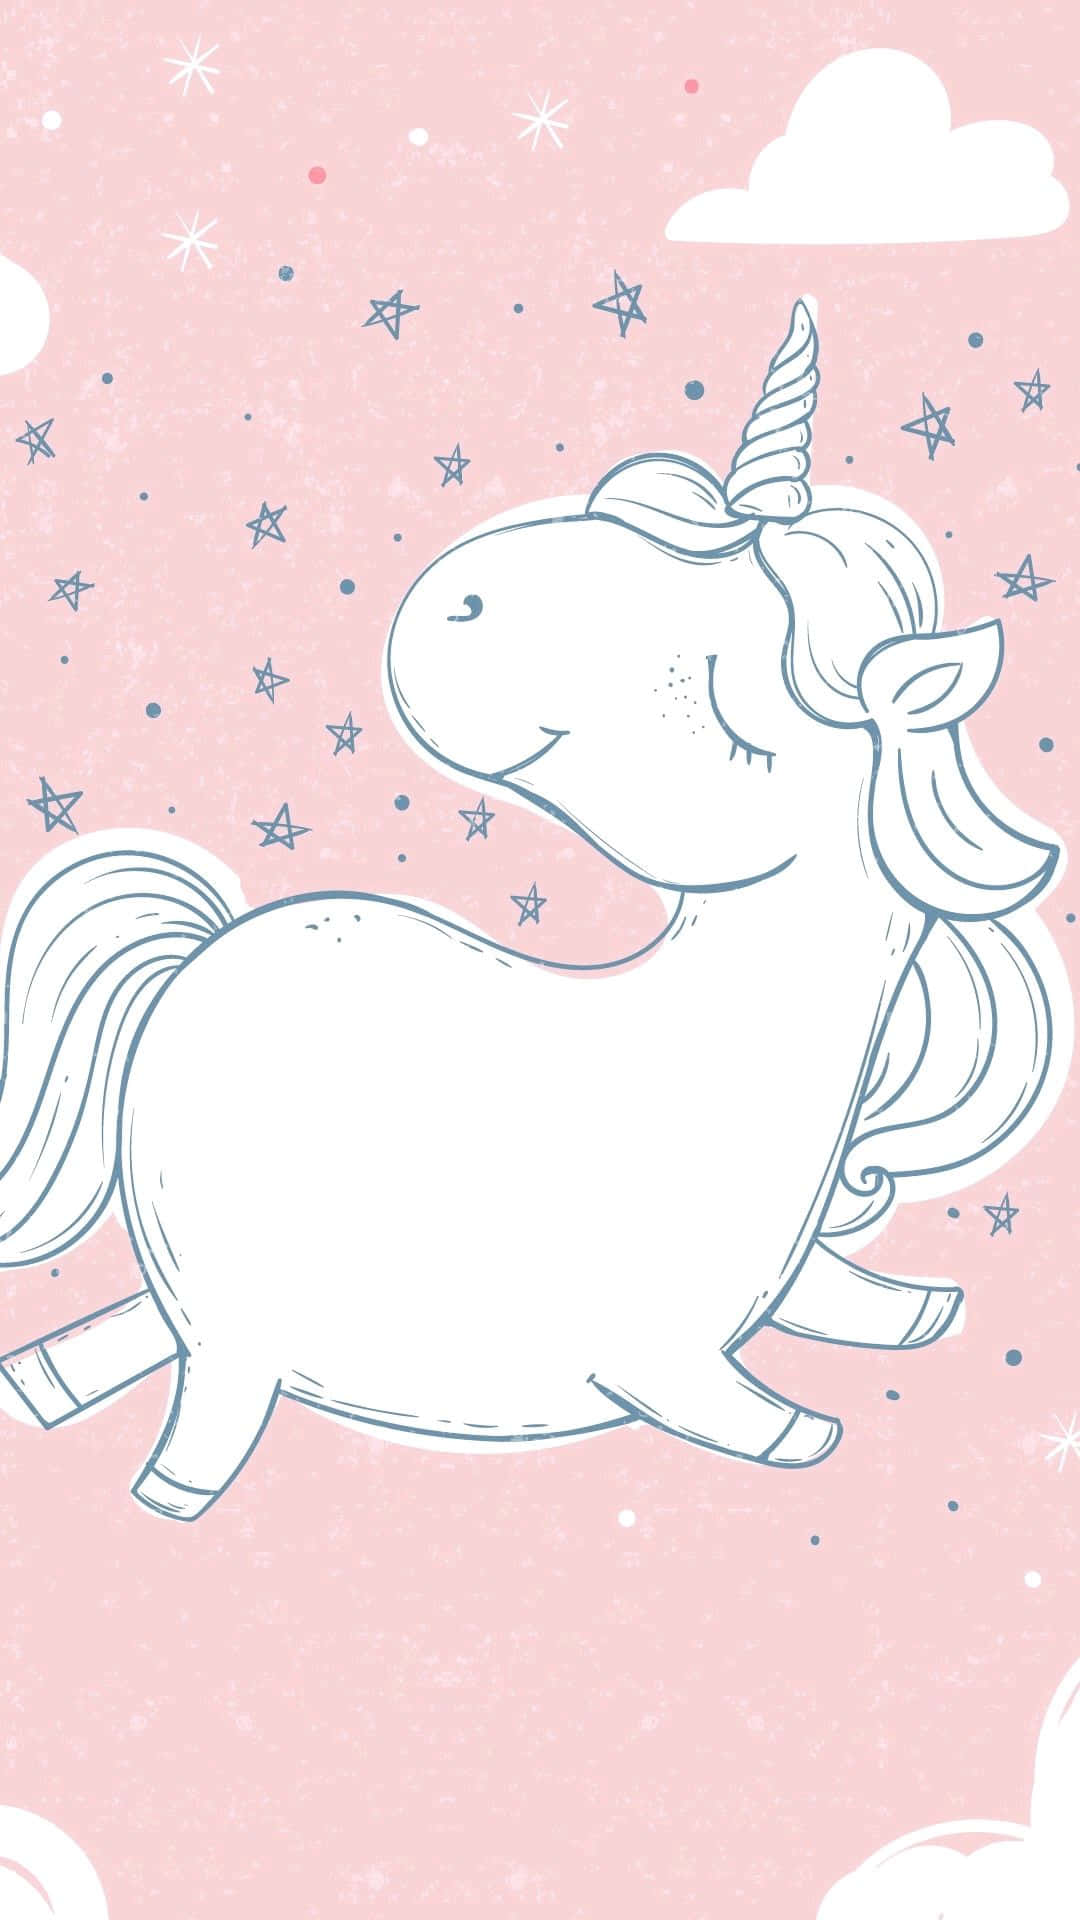 Download Cute Unicorn Pastel Pink Aesthetic Illustration Art Picture